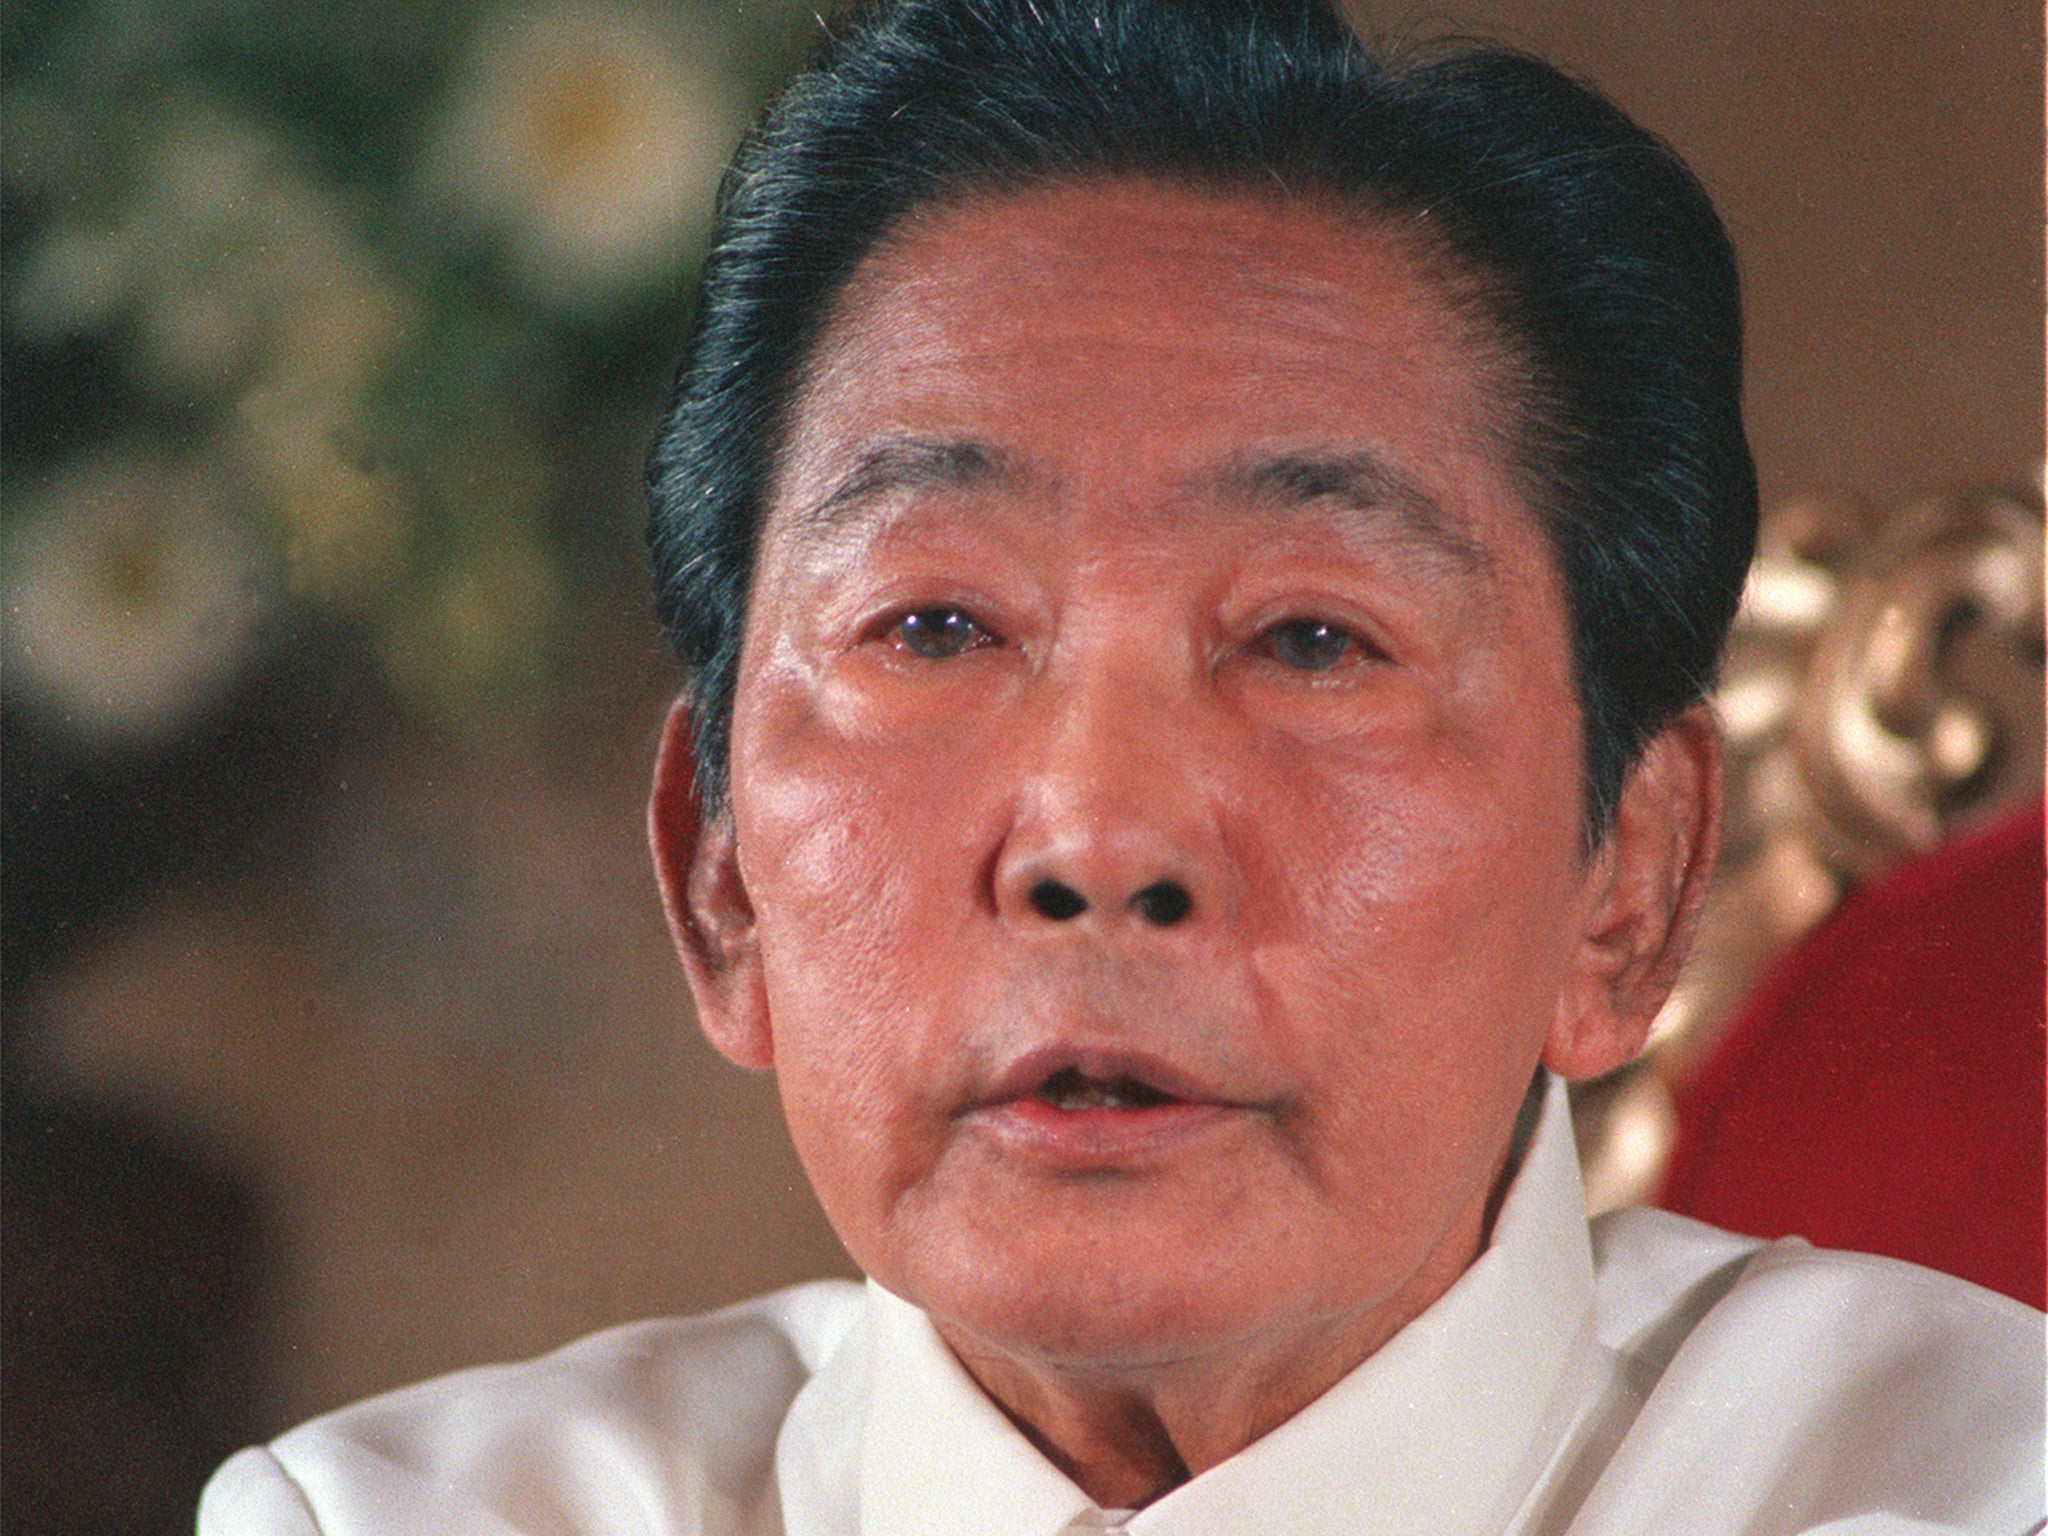 Artworks from the late President Ferdinand Marcos' collection have been seized